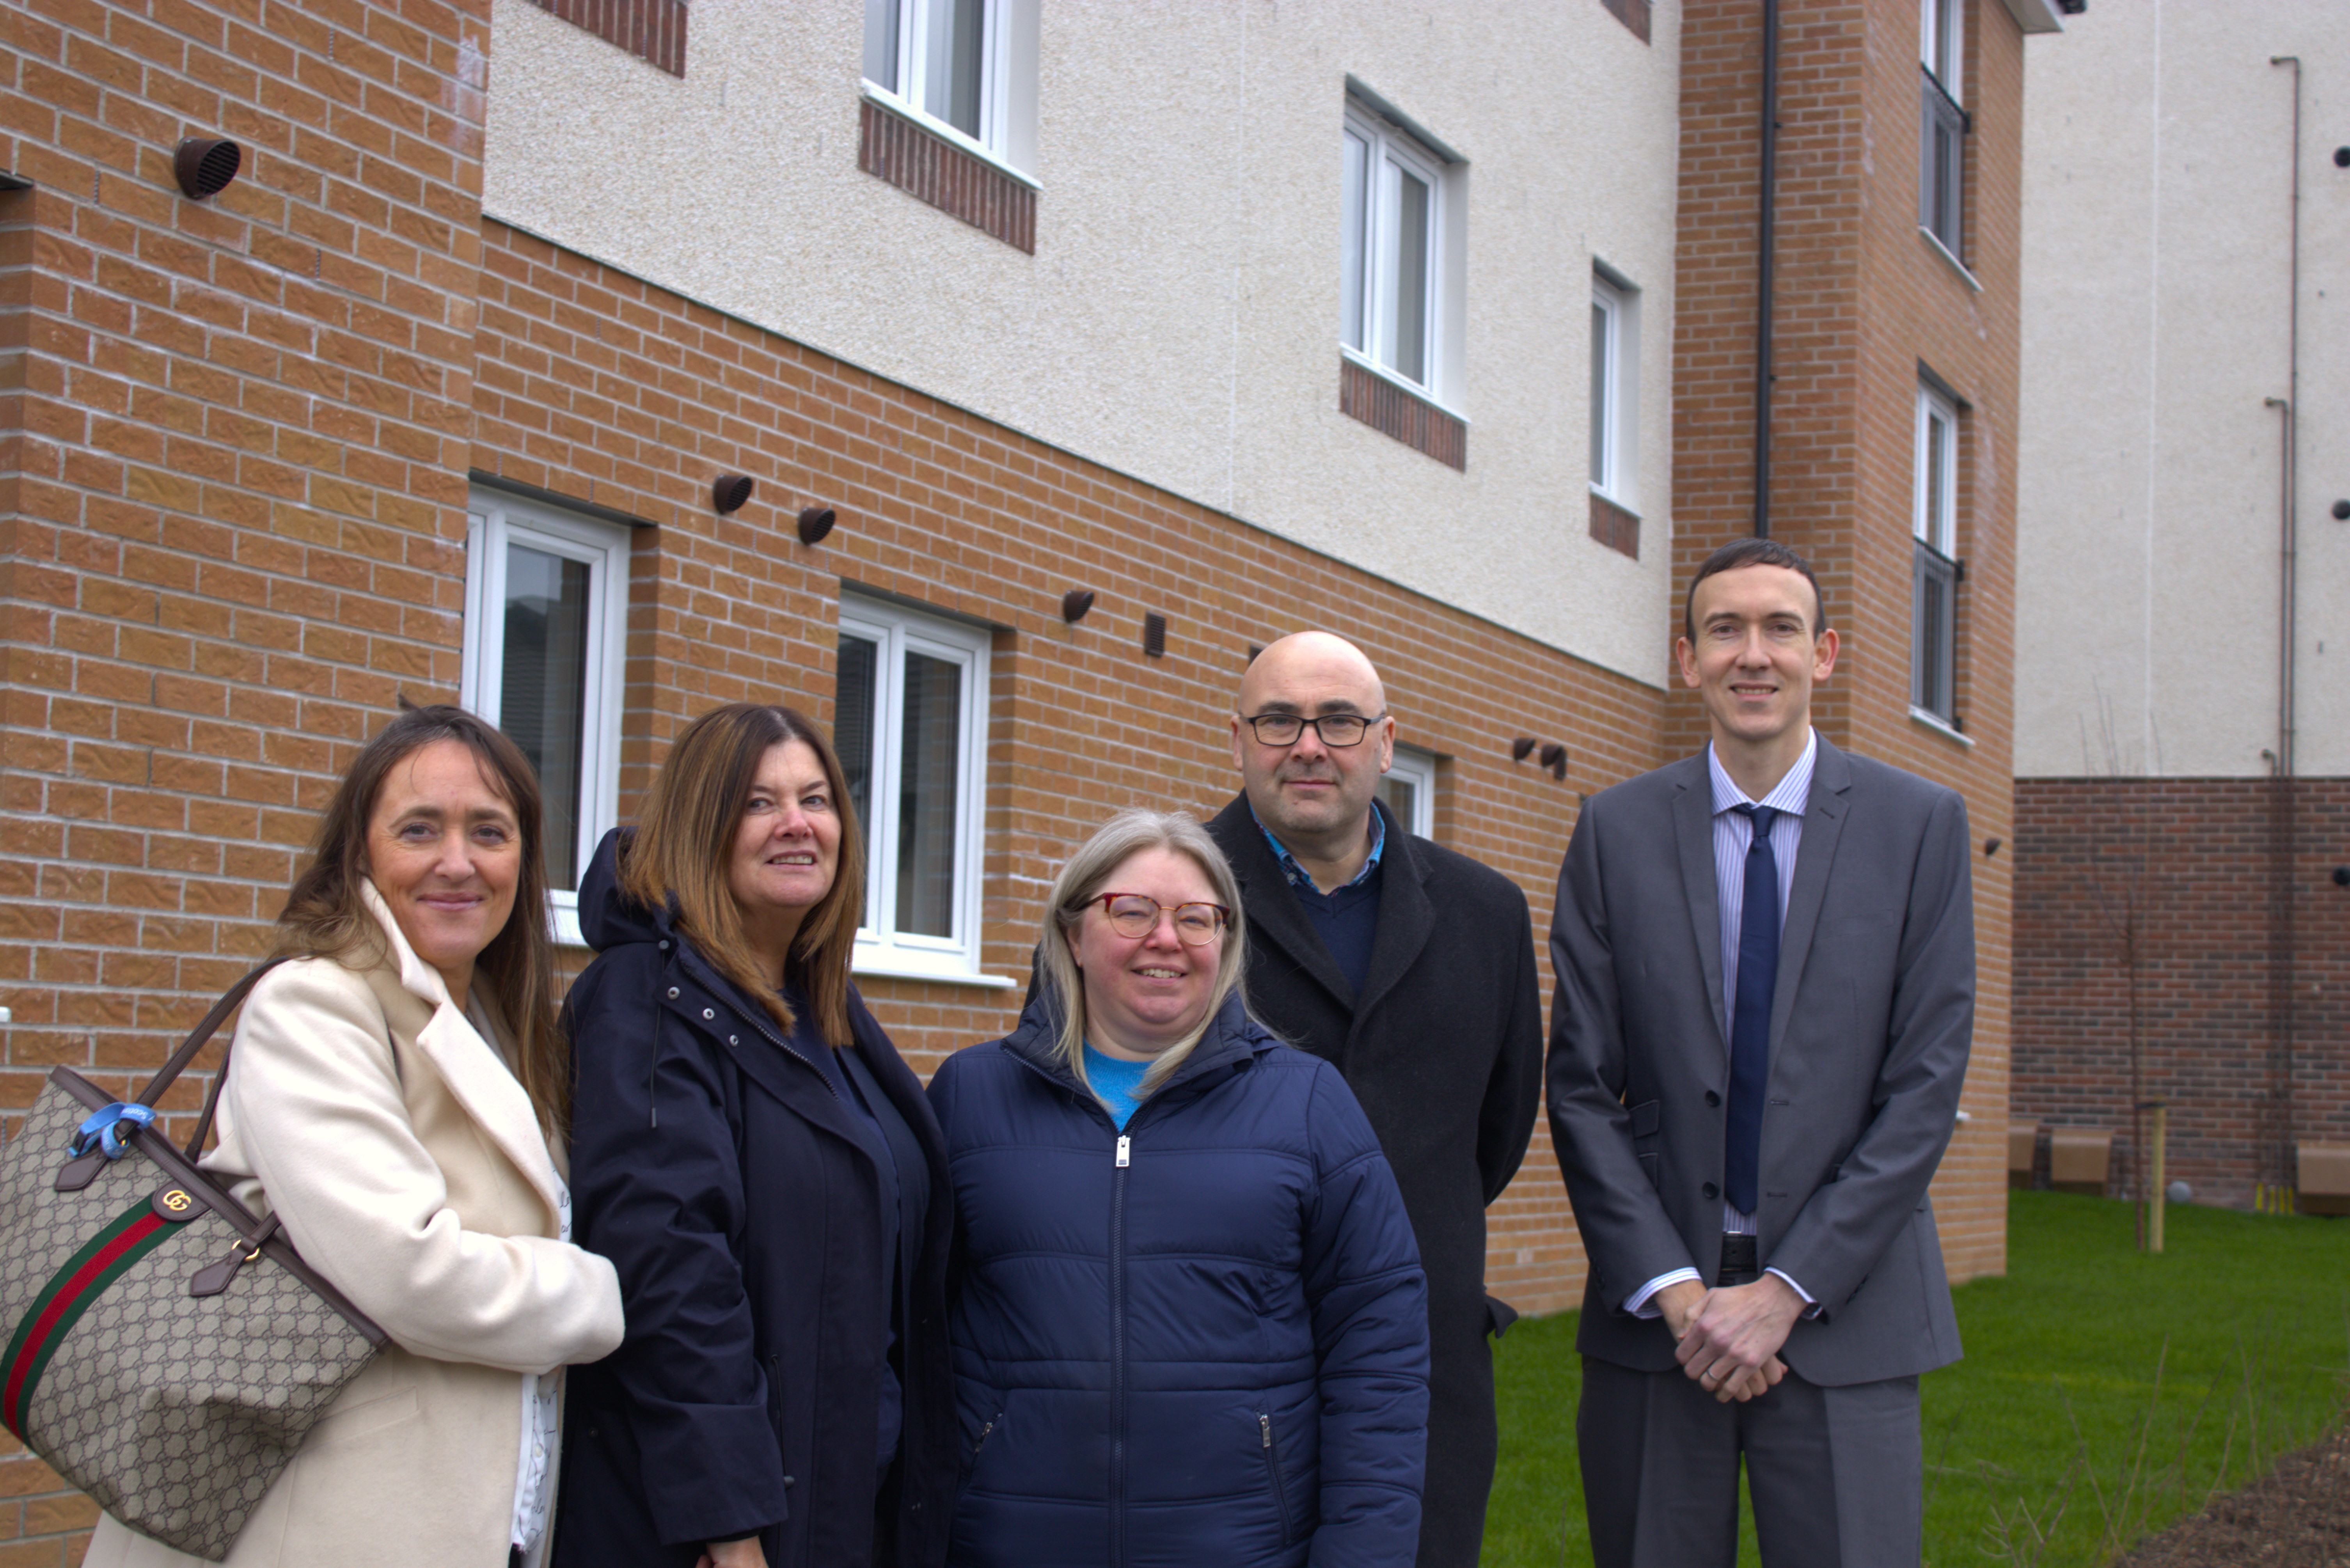 Sanctuary and Persimmon bring new affordable homes to East Dunbartonshire